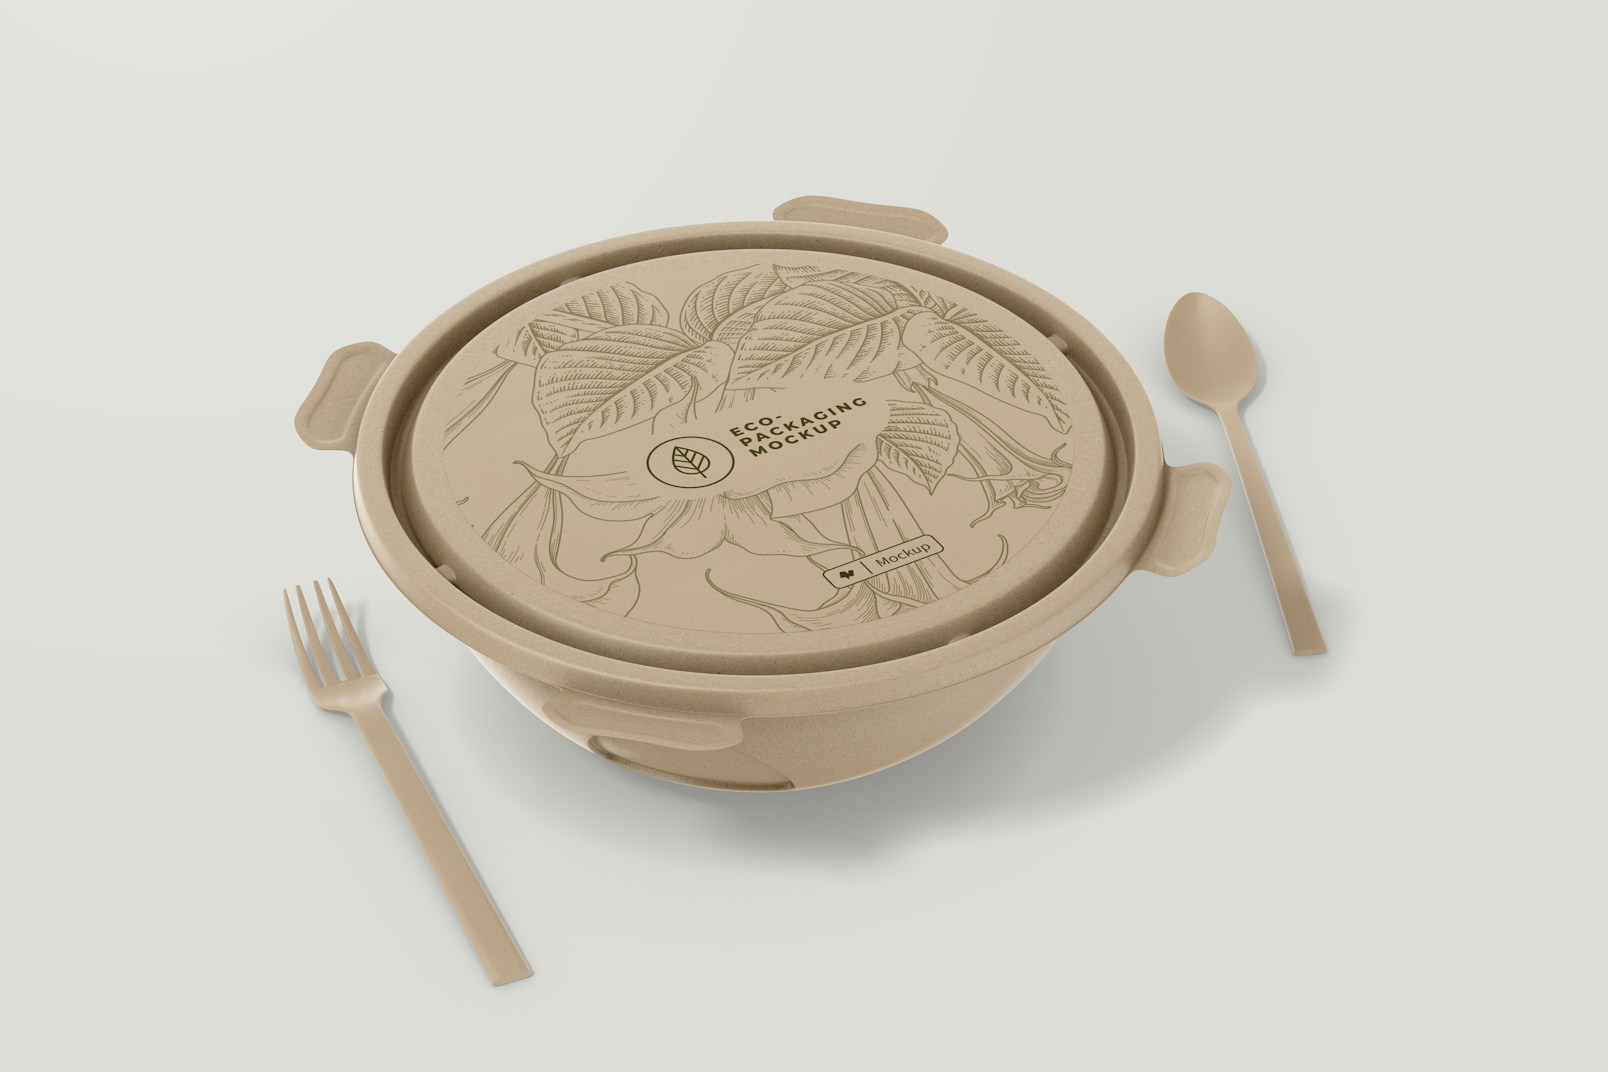 Compostable Bowl with Lid Mockup, Perspective